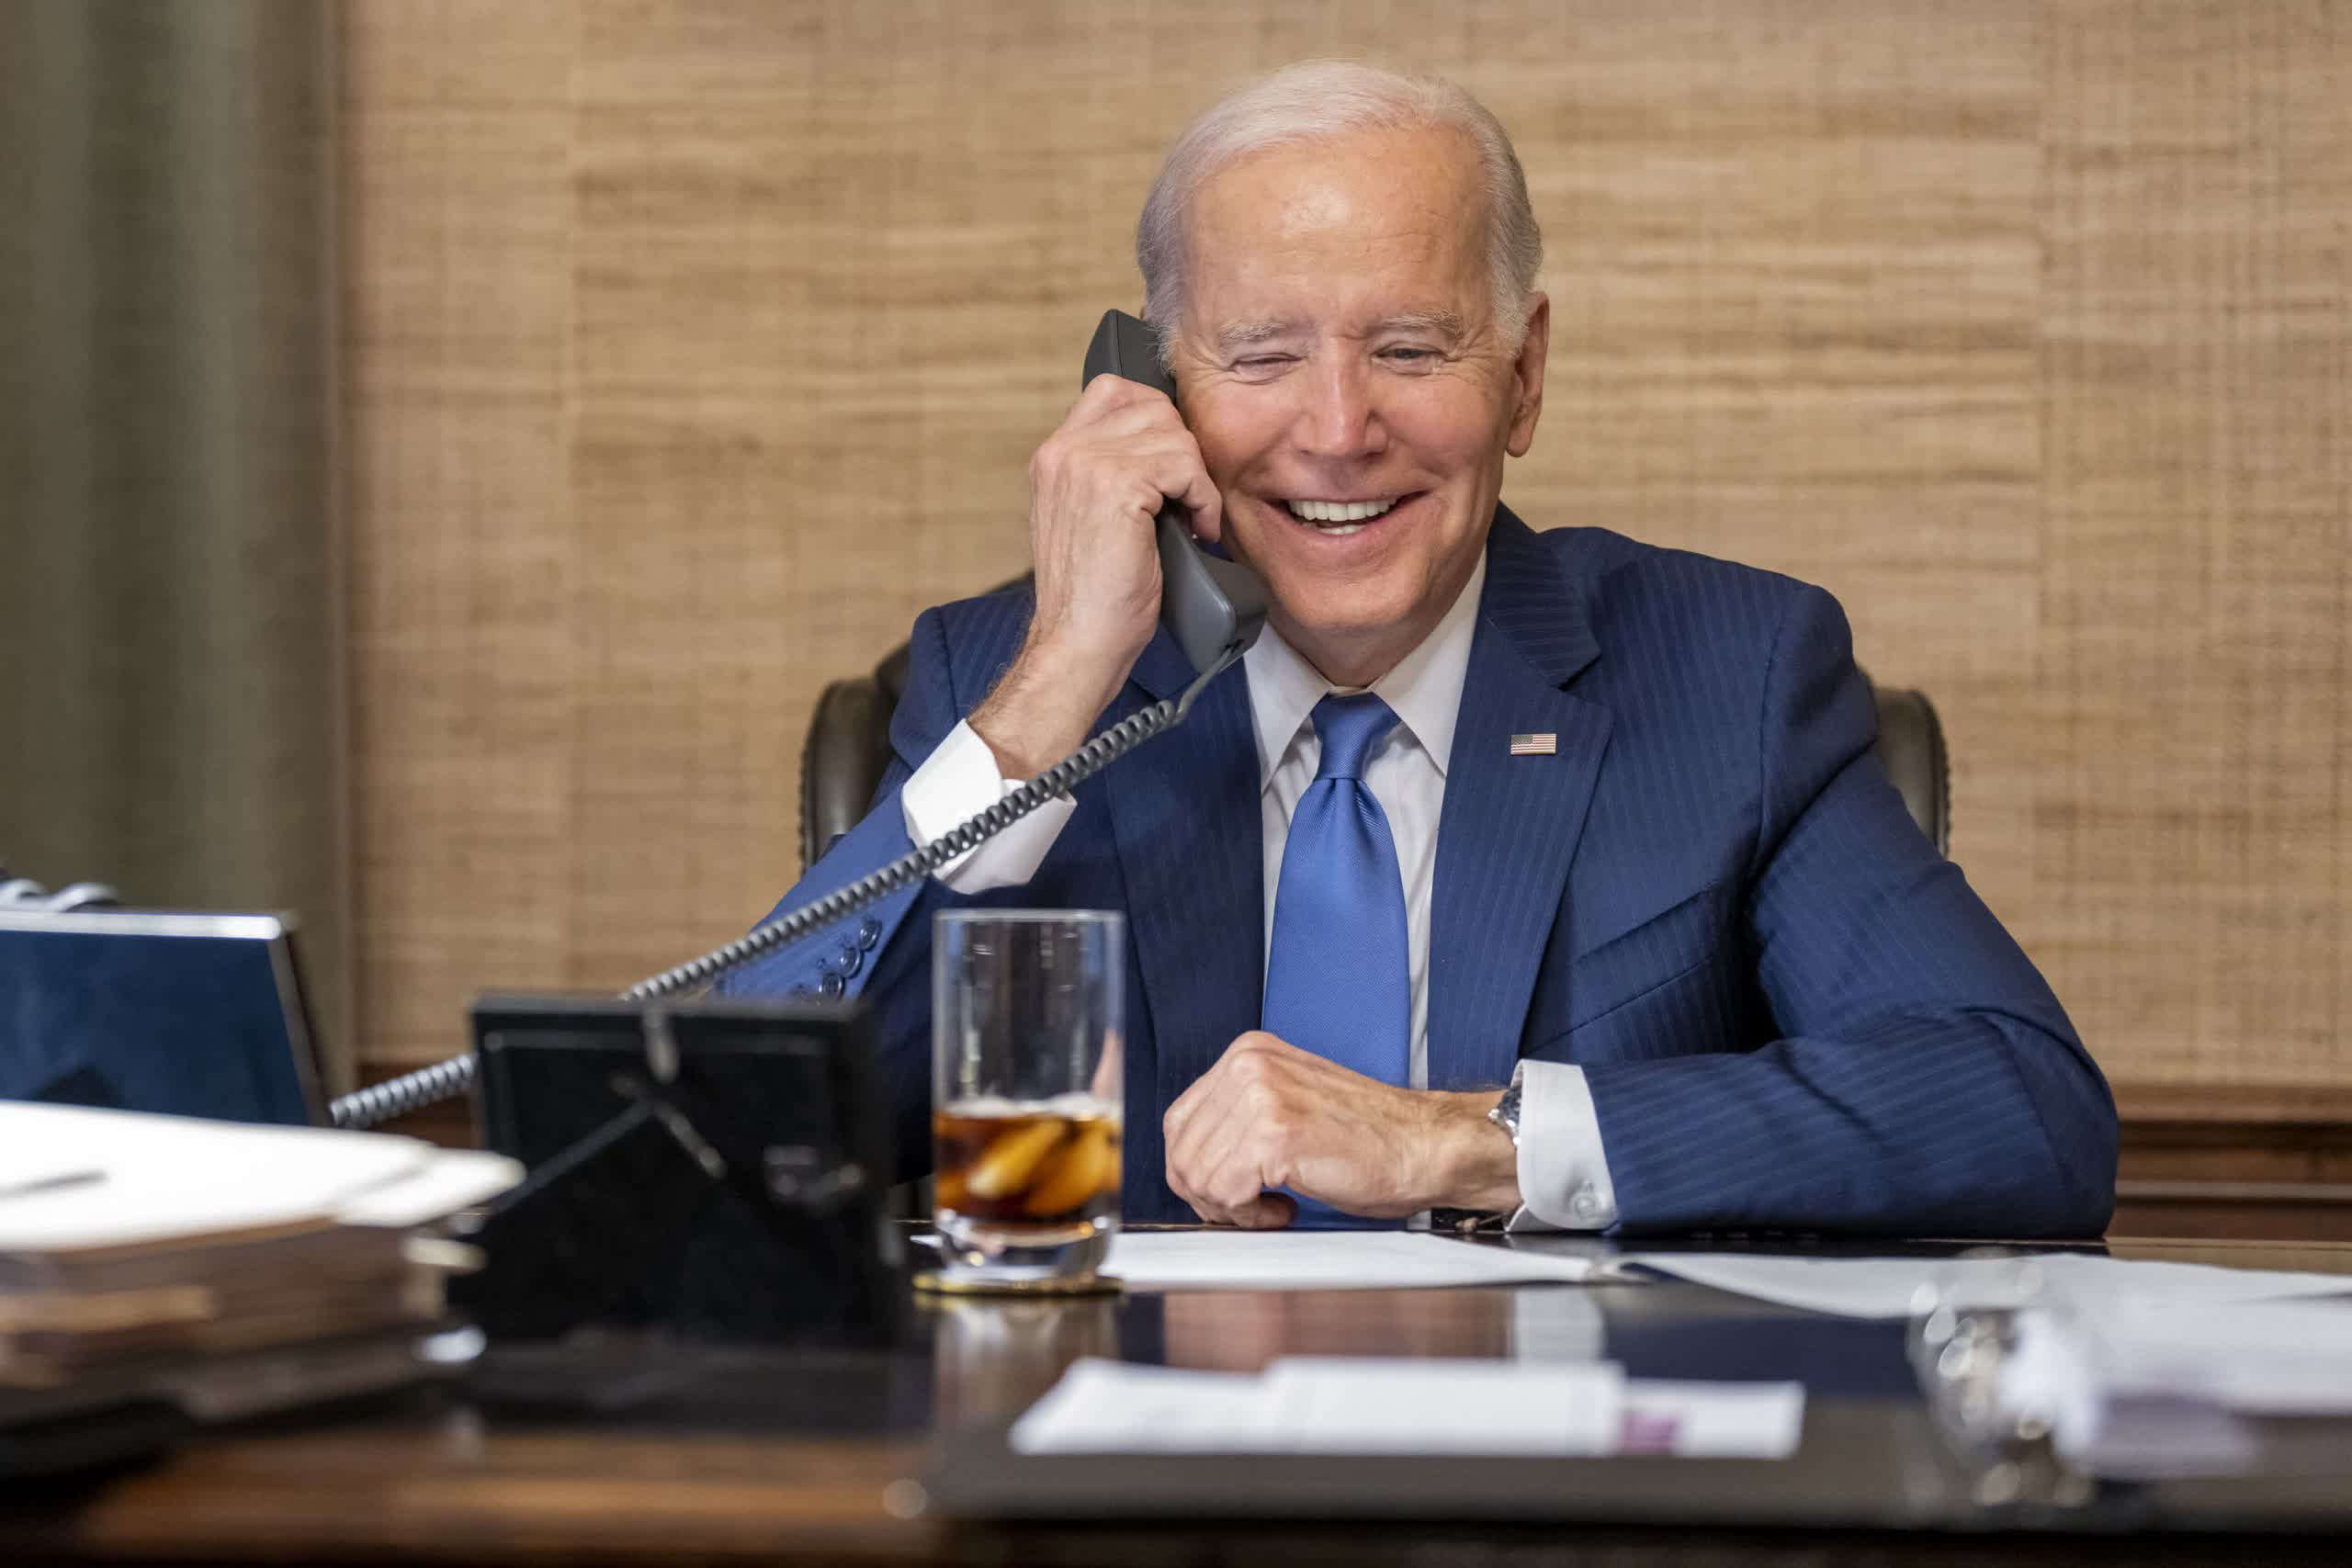 ElevenLabs, whose tech was used for the fake Biden robocalls, partners with AI-detection company